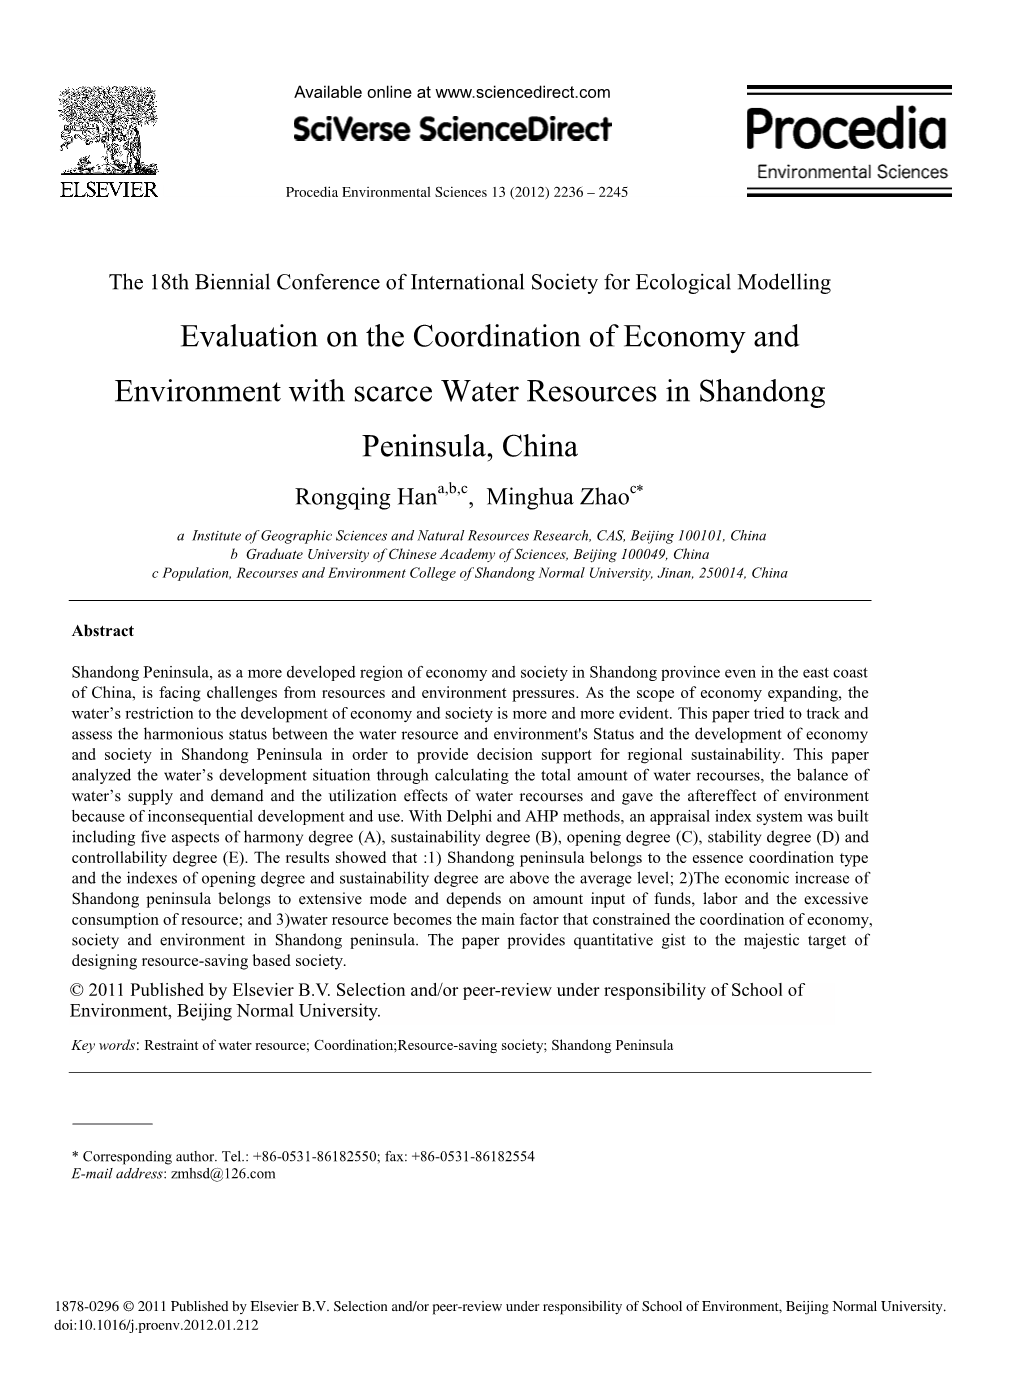 Evaluation on the Coordination of Economy and Environment with Scarce Water Resources in Shandong Peninsula, China Rongqing Hana,B,C, Minghua Zhaoc